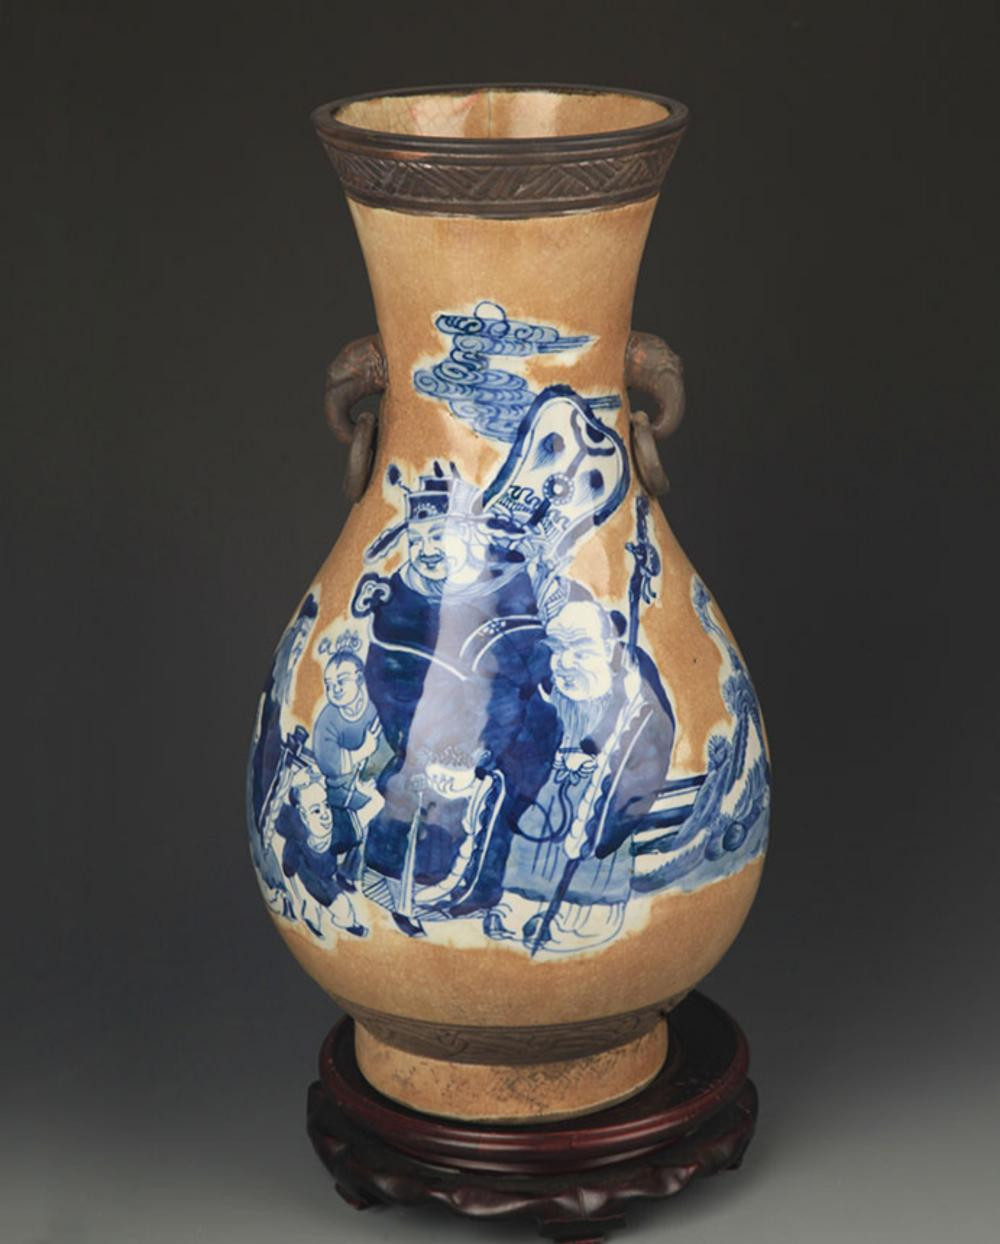 16 Famous Blue and White Porcelain Vases for Sale 2024 free download blue and white porcelain vases for sale of chinese art antiques for sale at online auction modern antique intended for a blue and white story painted elephant ear vase